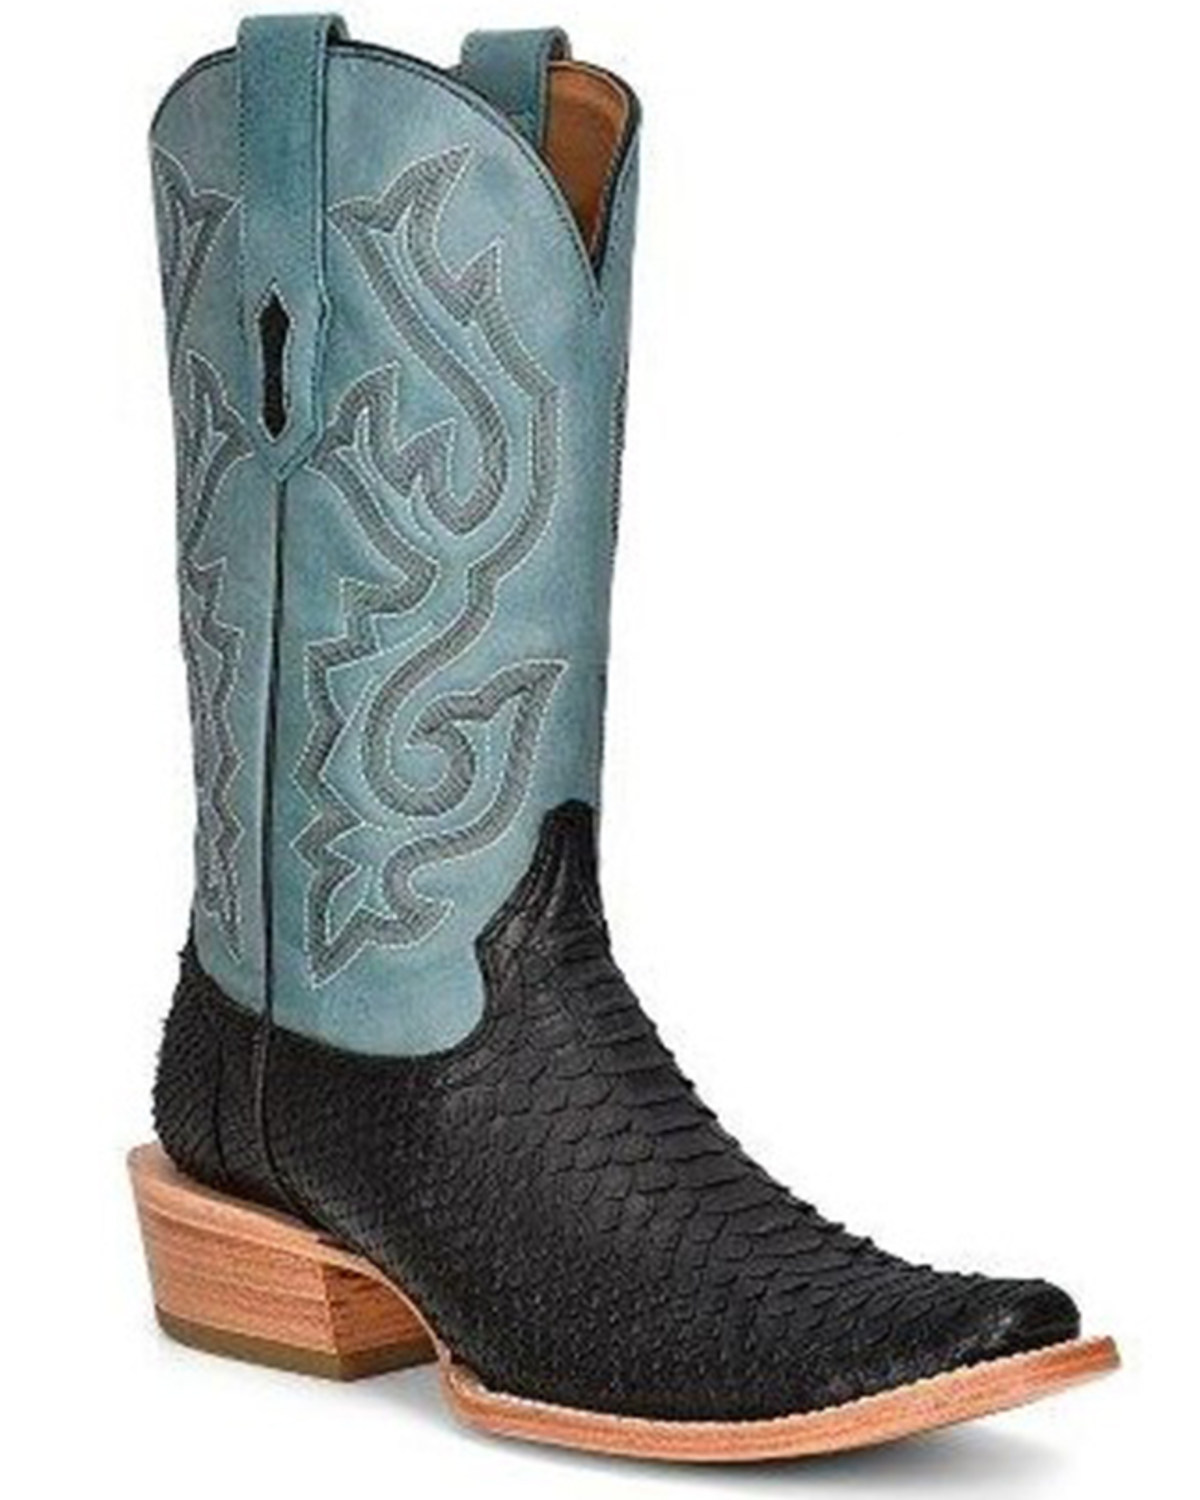 Corral Men's Exotic Python Western Boots - Square Toe